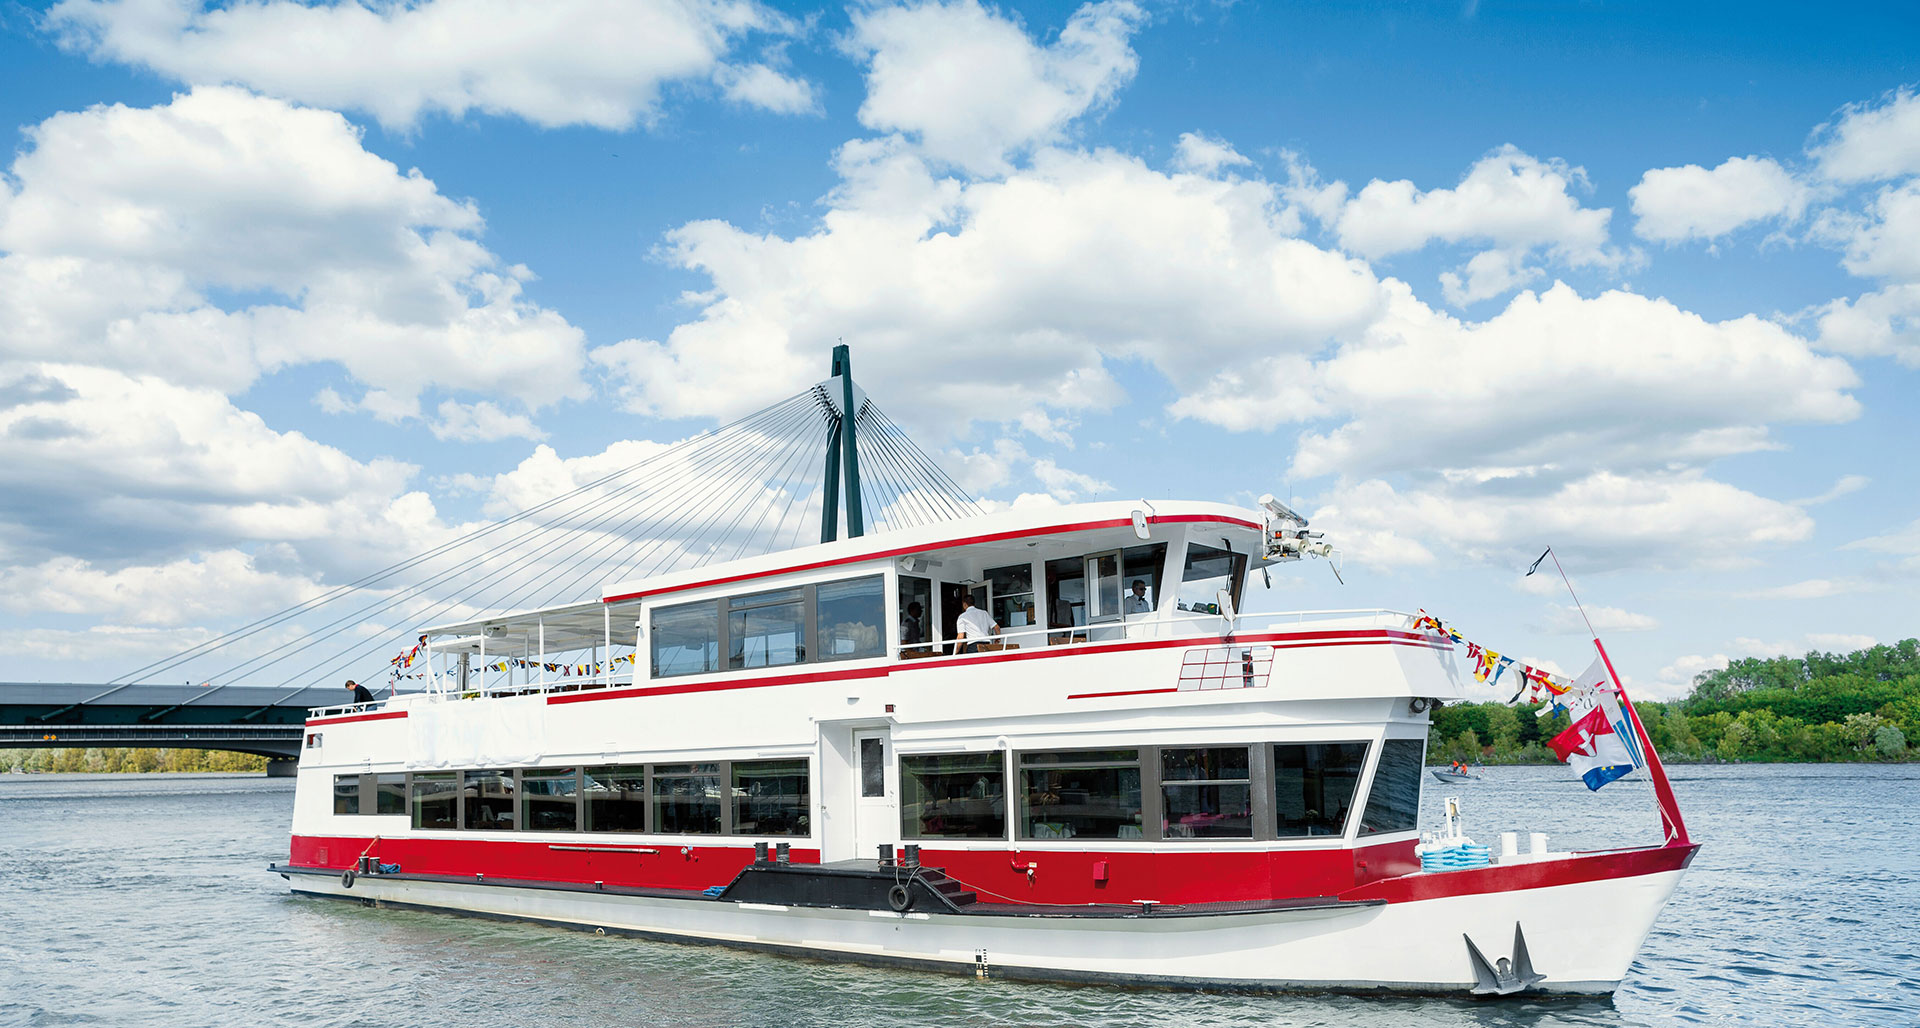 Best Places to Book a Danube River Cruise